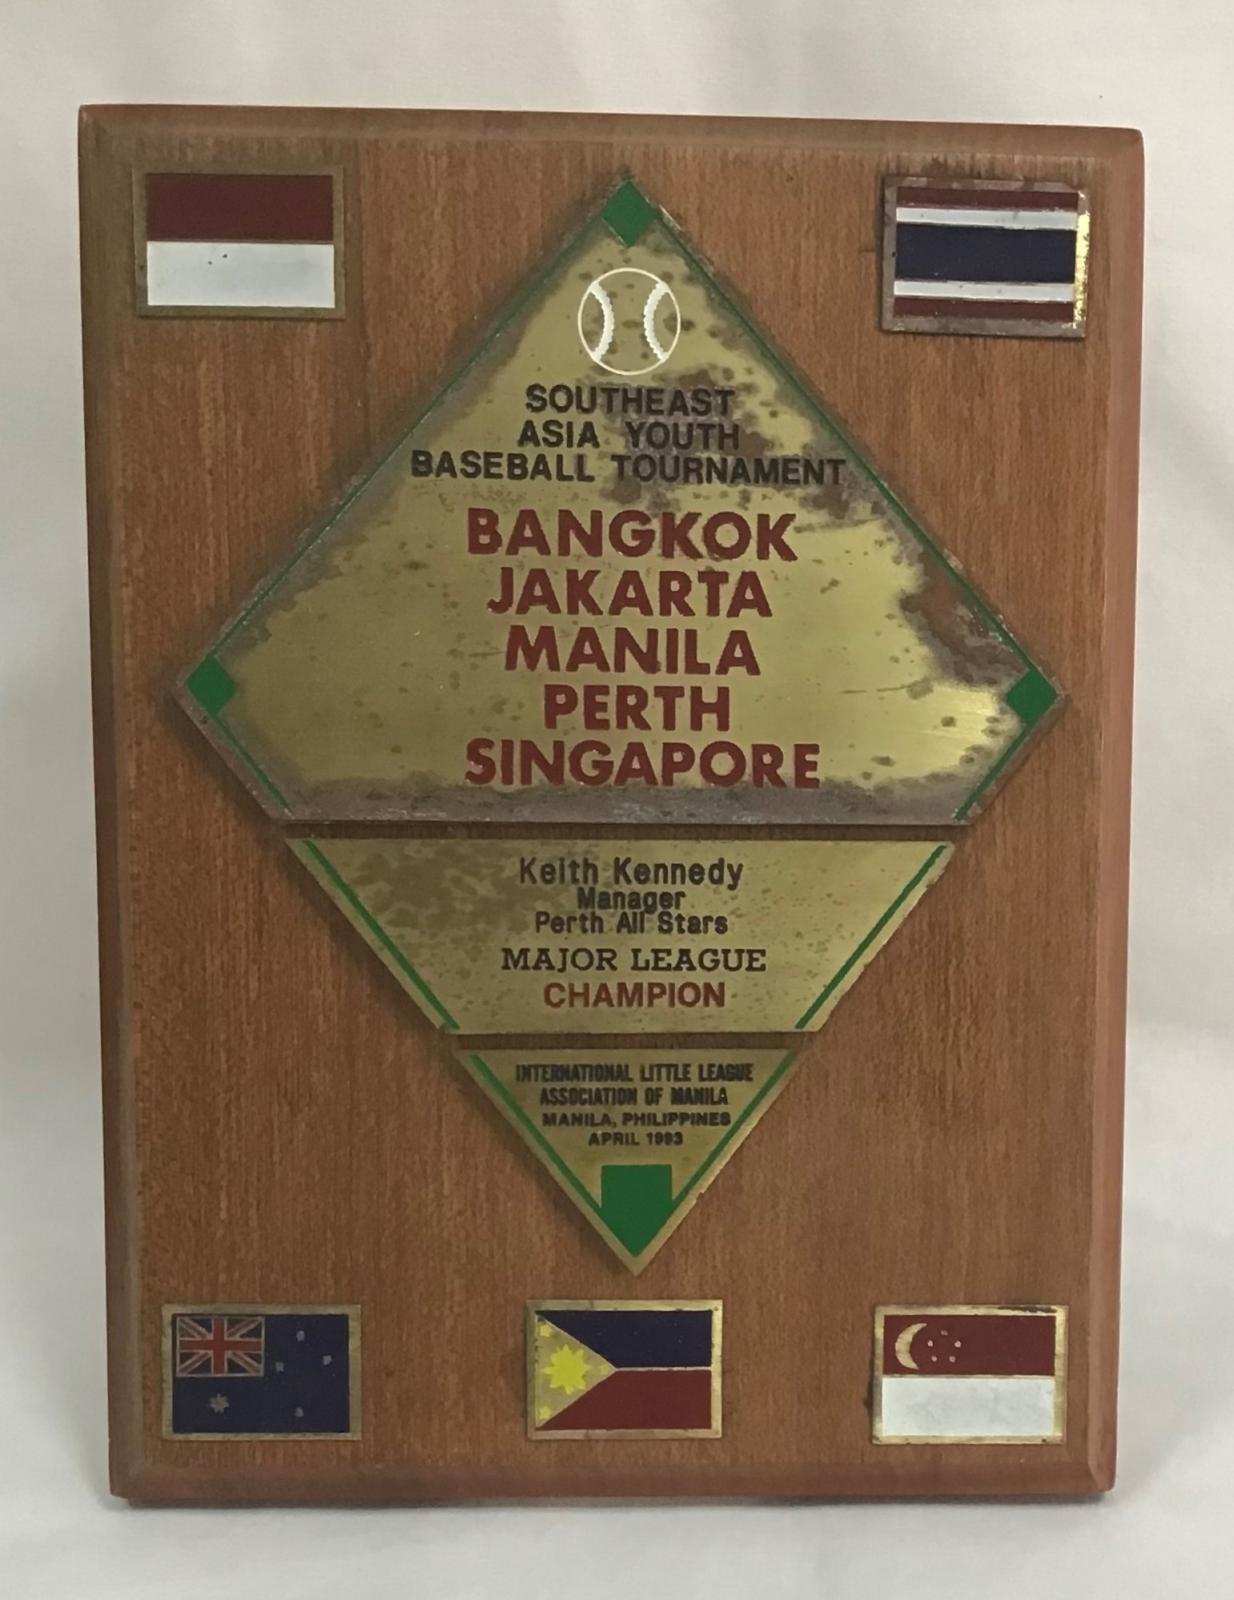 1993 Southeast Asia Youth Baseball Tournament plaque